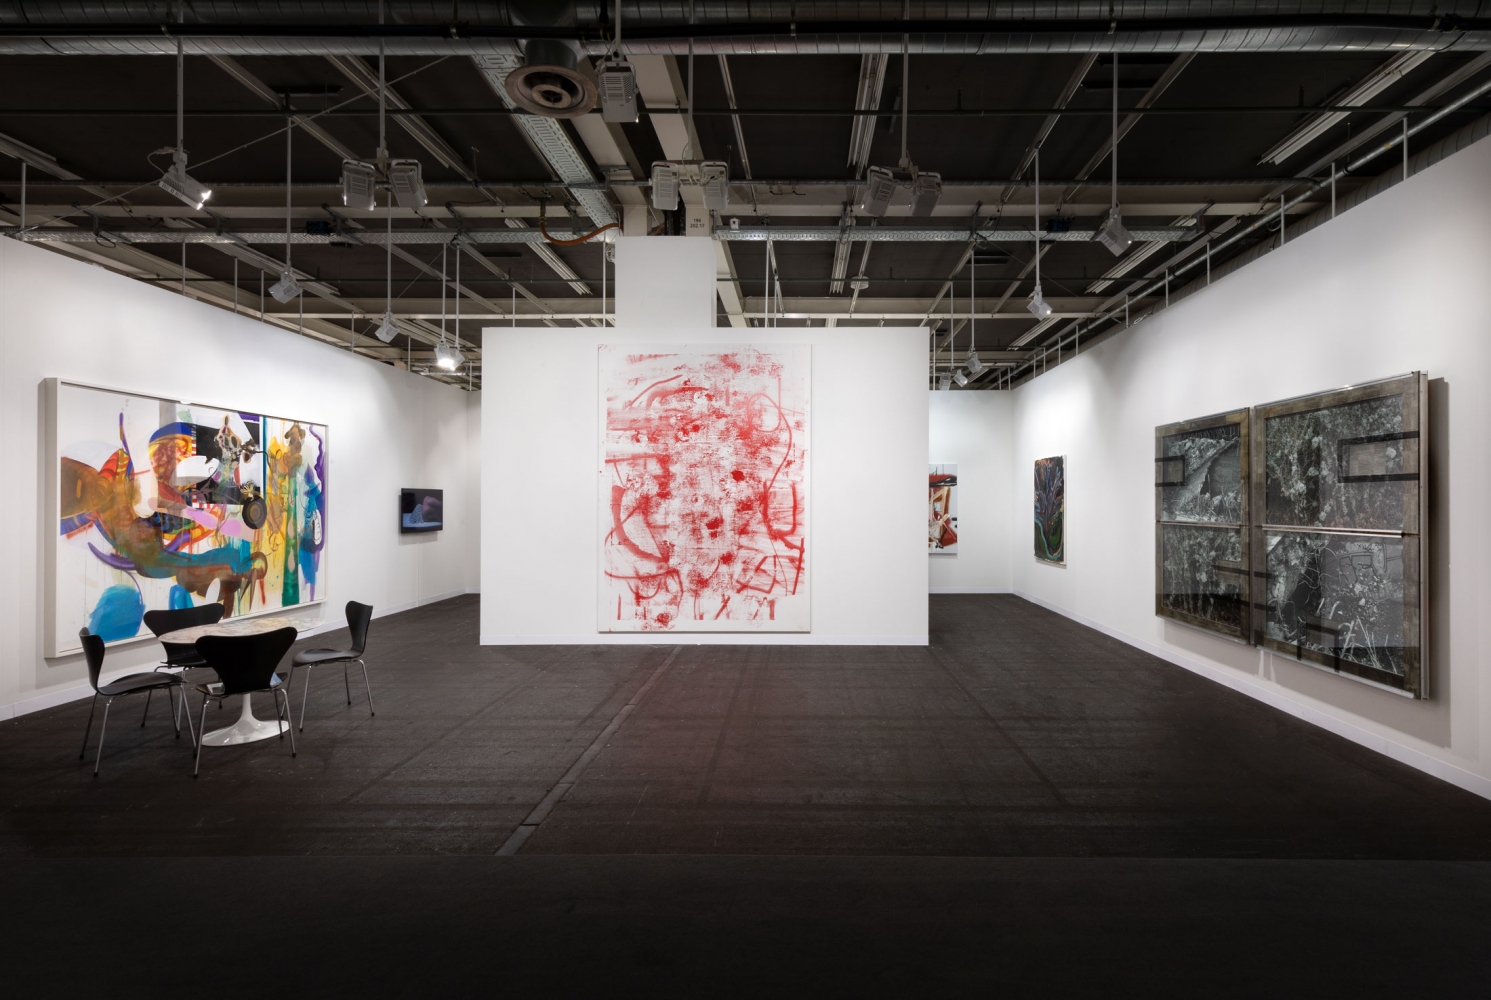 Luhring Augustine

Art Basel, Booth A3

Installation view

2019

Pictured from left: Albert Oehlen, Simone Leigh, Christopher Wool, Jeff Elrod, Josh Smith, Reinhard Mucha